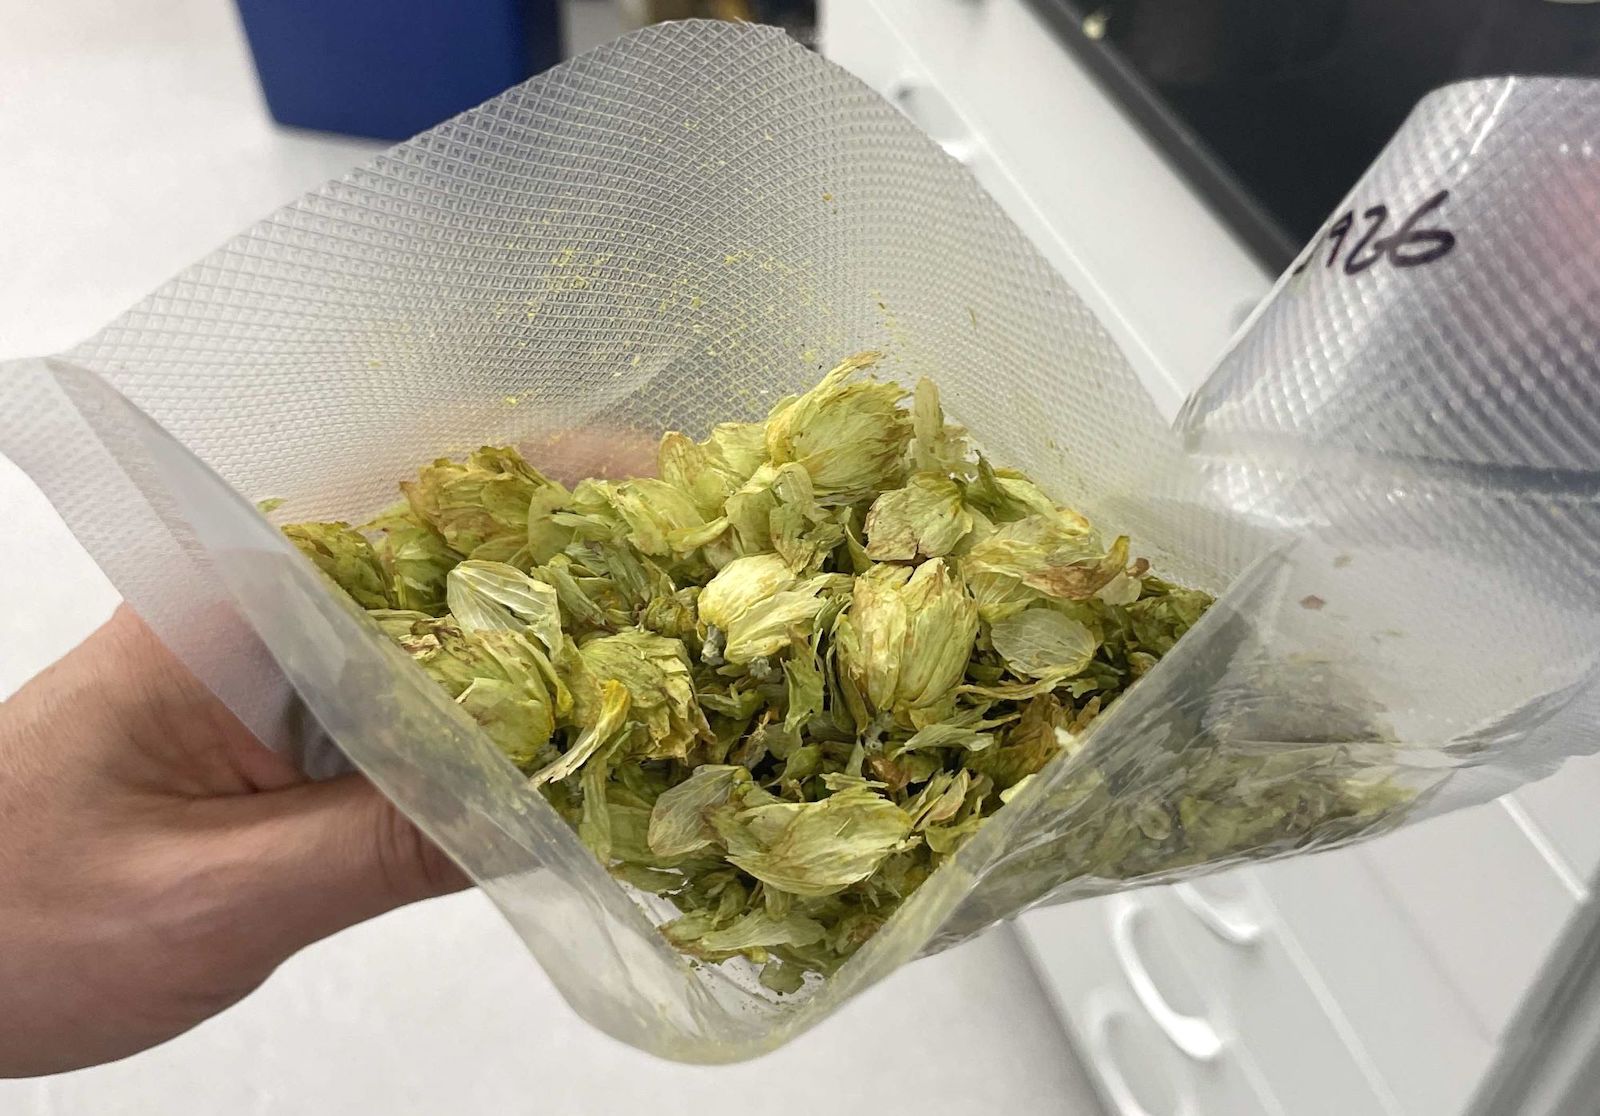 A hand holds a plastic folder of feral hops. The hops are dried and green with a wild floral appearance.